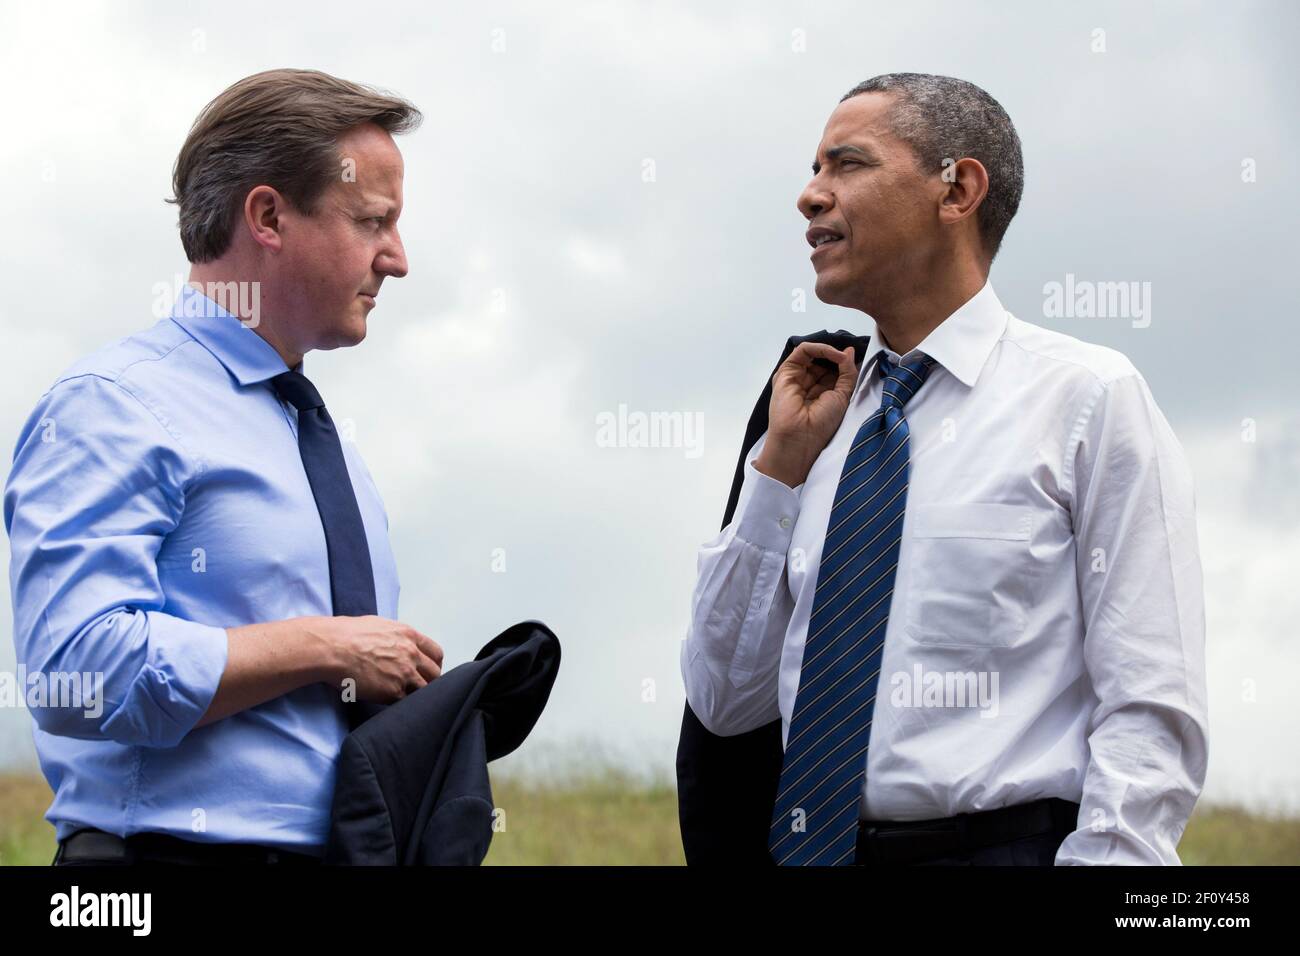 President Barack Obama and Prime Minister David Cameron of the United Kingdom talk during the G8 Summit, June 17, 2013 Stock Photo